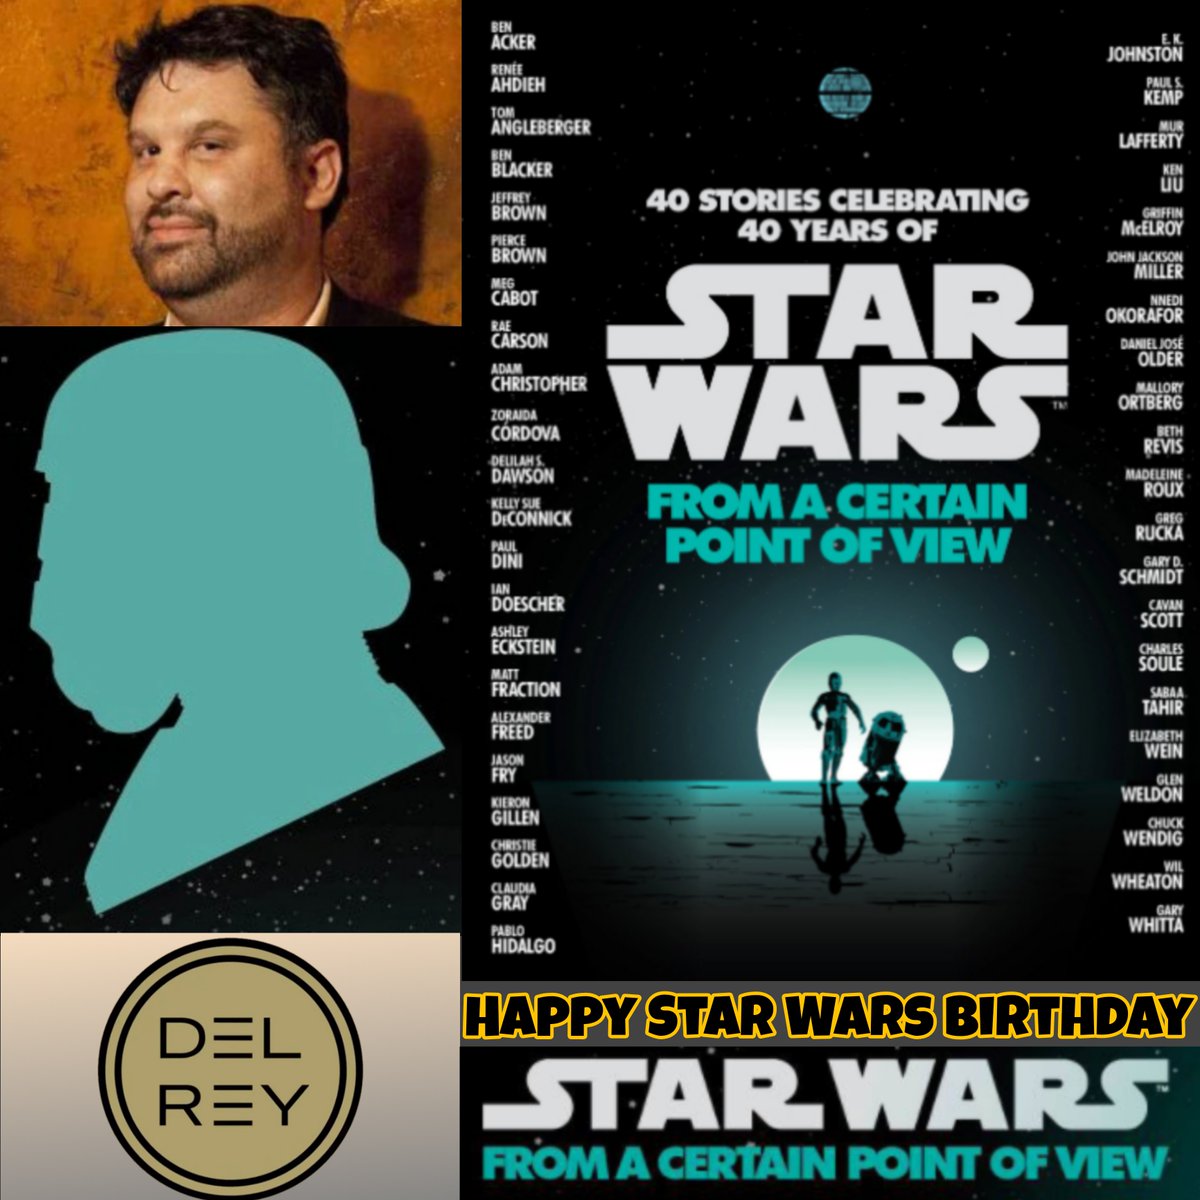 Happy Birthday to @bnacker, he co-wrote with @BenBlacker ''Bump'' in the anthology #FromACertainPointOfView, #StarWars #TheLastJediTheStormsOfCrait1, #StarWars #TheLastJedi #DJMostWanted1 & canon junior novel #JoinTheResistance. May he have a good one.